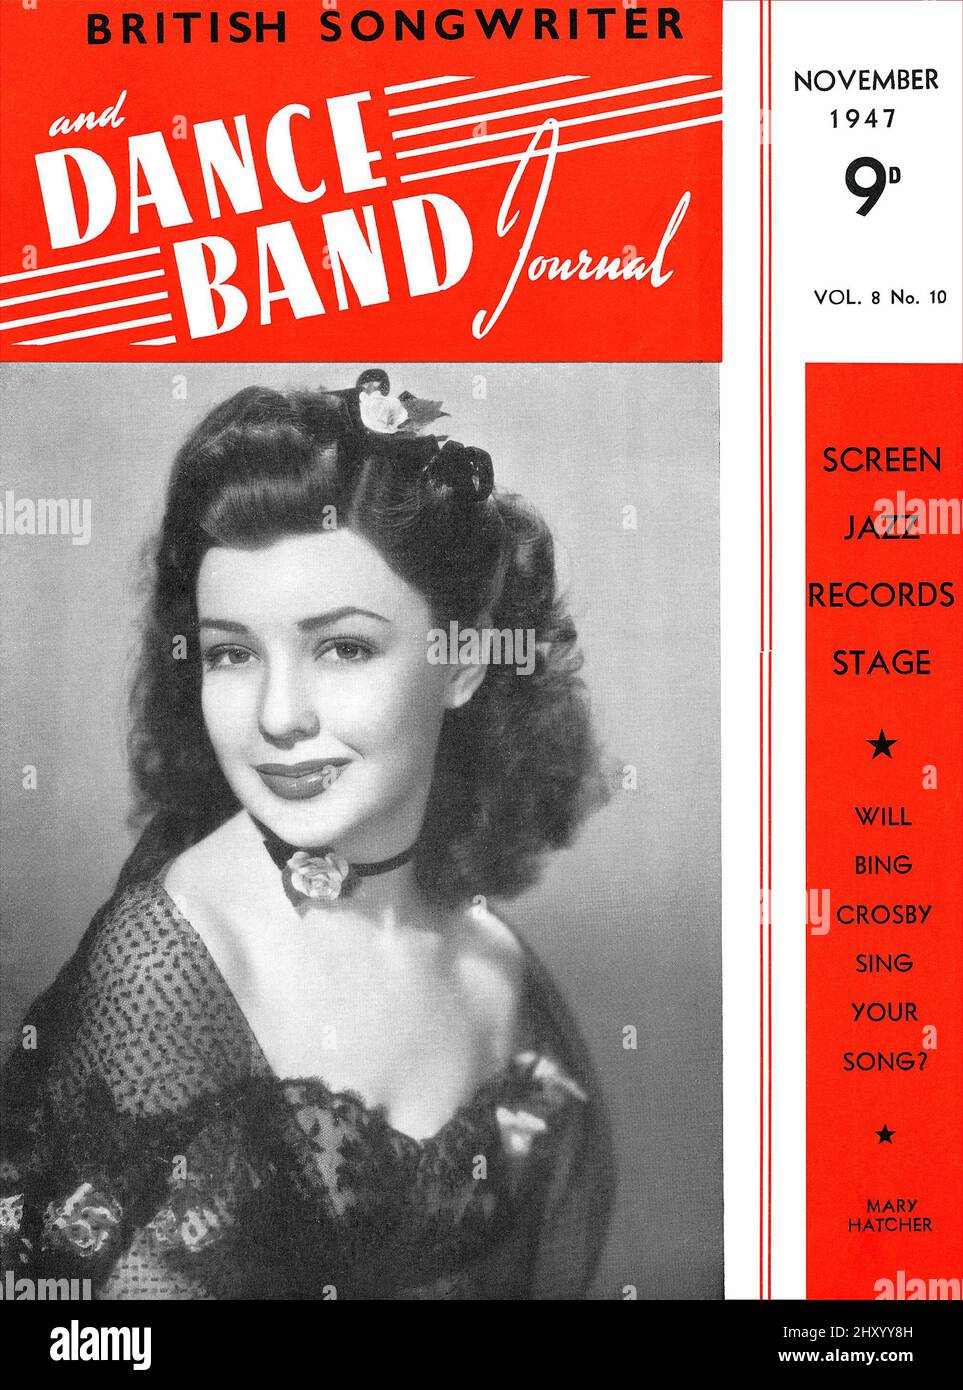 Vintage magazine cover of British Songwriter And Dance Band Journal for November 1947, featuring actor and singer Mary Hatcher. Stock Photo